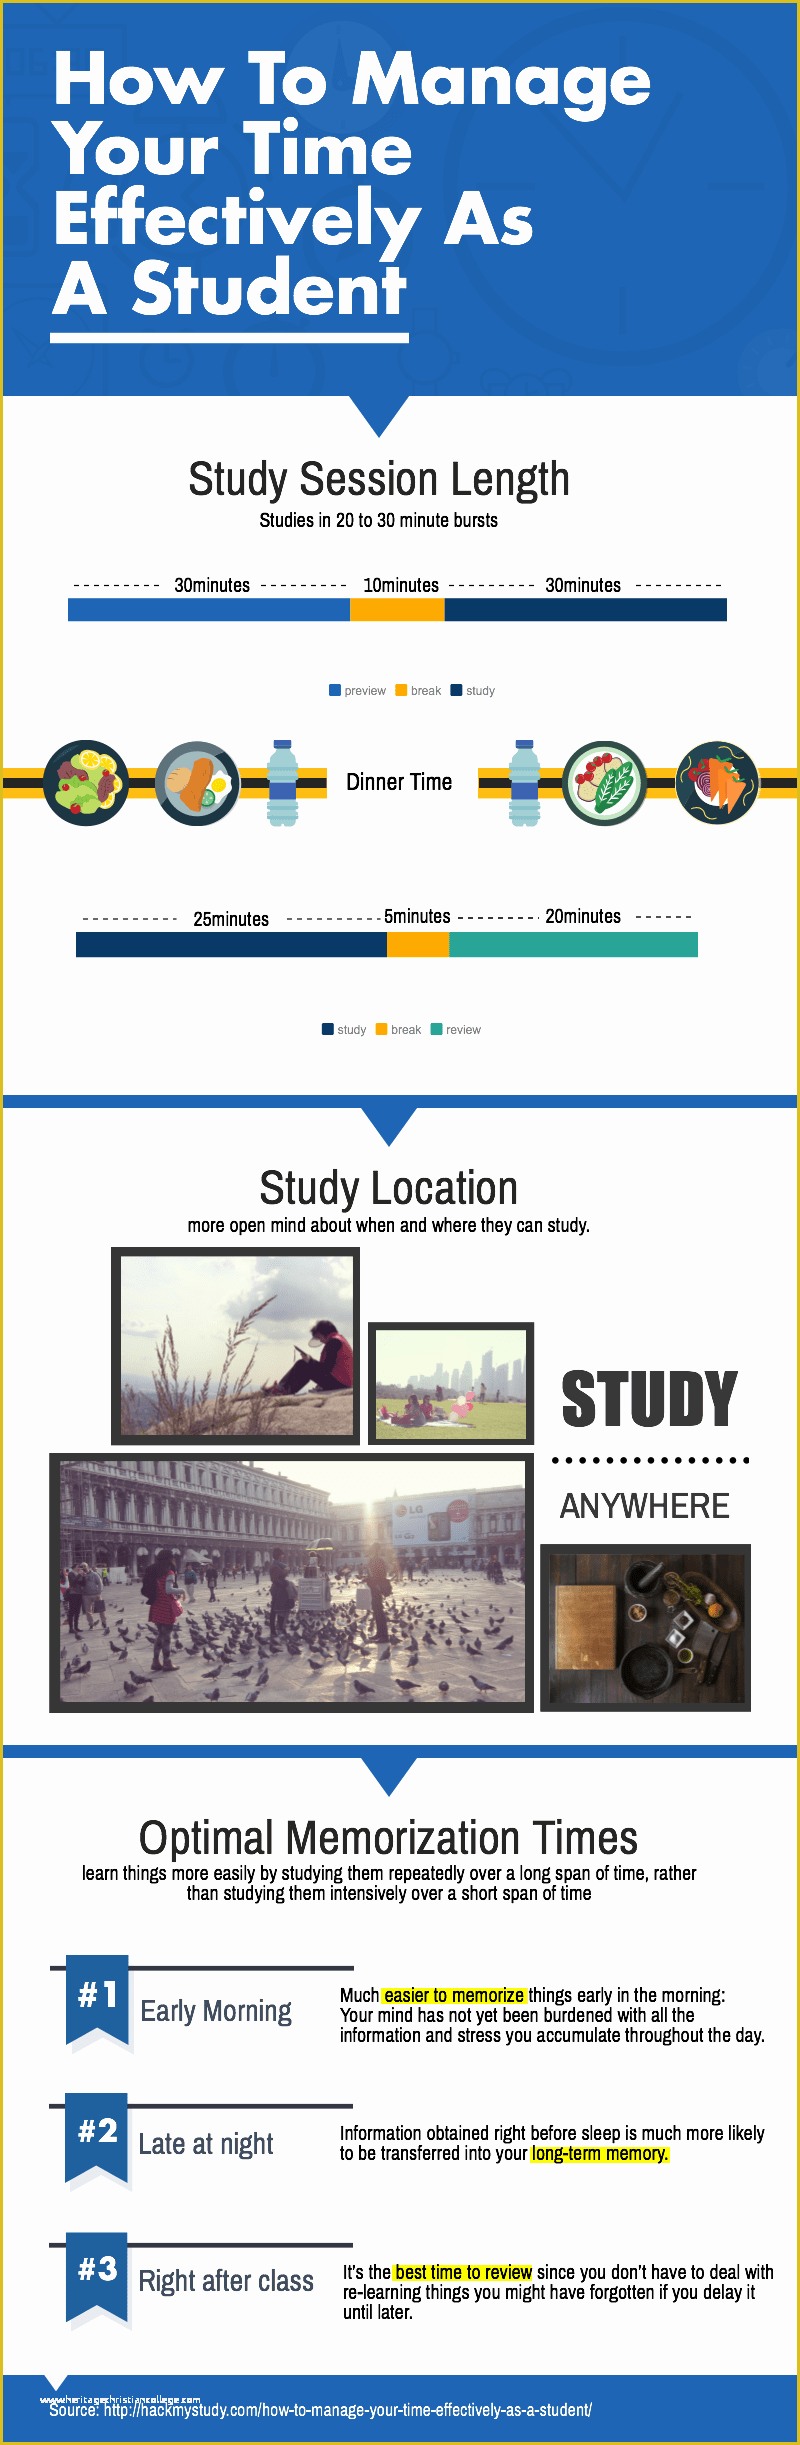 Free Infographic Templates for Students Of Infographic and Report Templates for Presenting Information